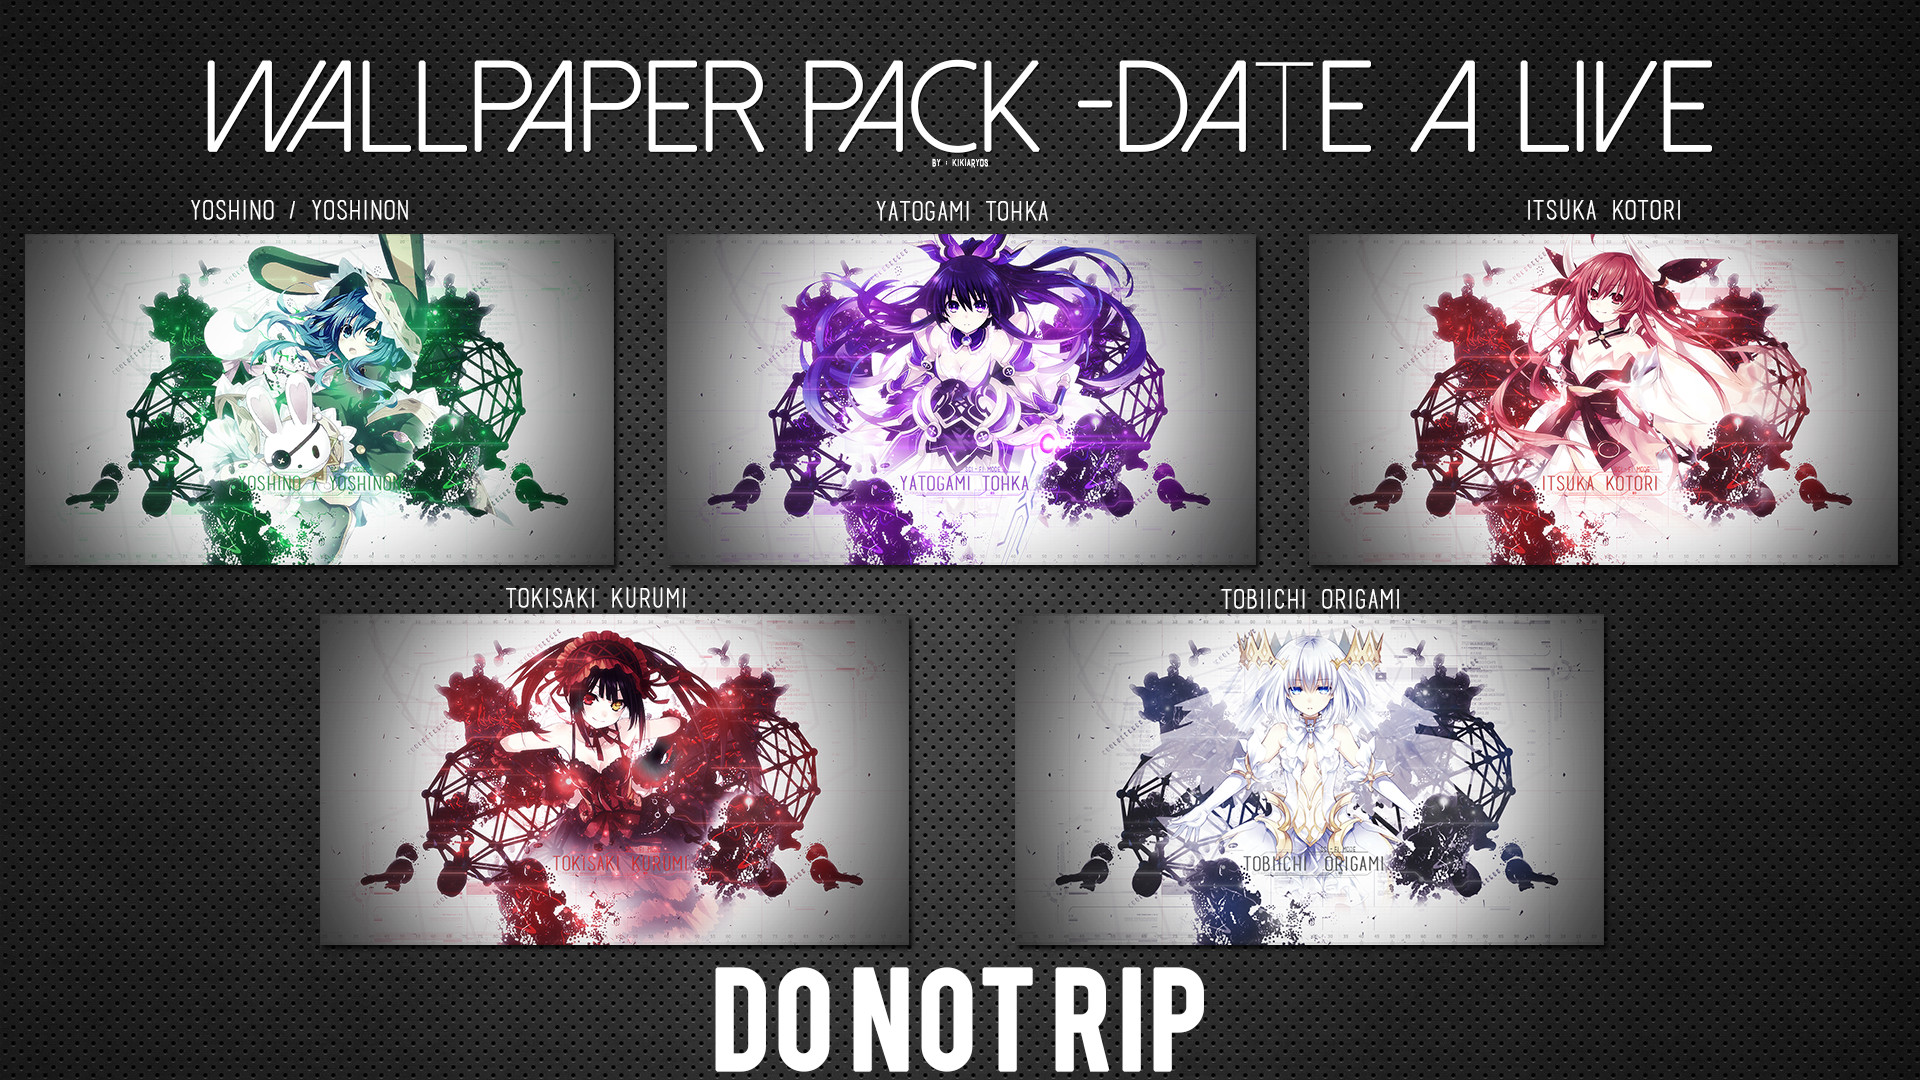 1920x1080 ... Wallpaper Pack #1 - Date A Live by kikiaryos